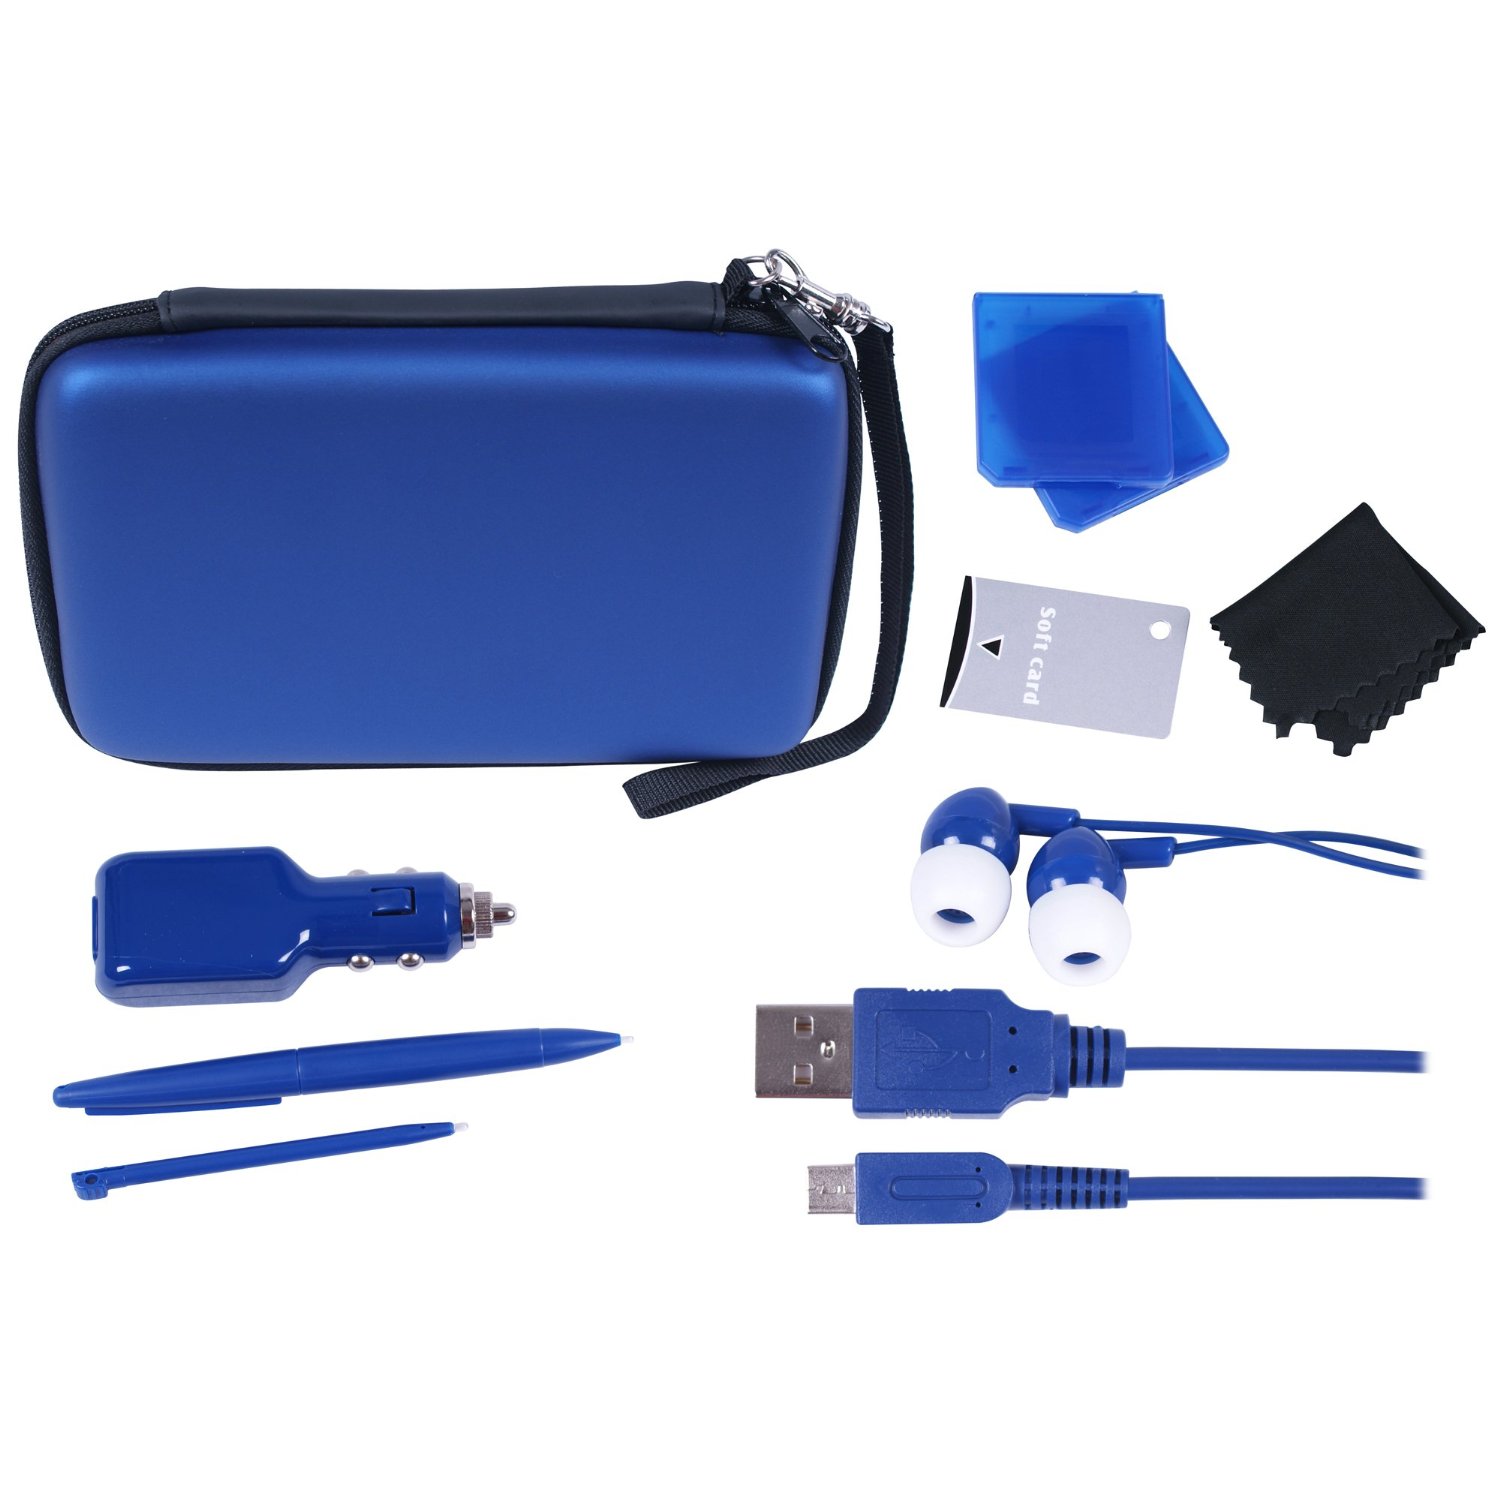 DSI XL 12in1 Deluxe Pack - Blue